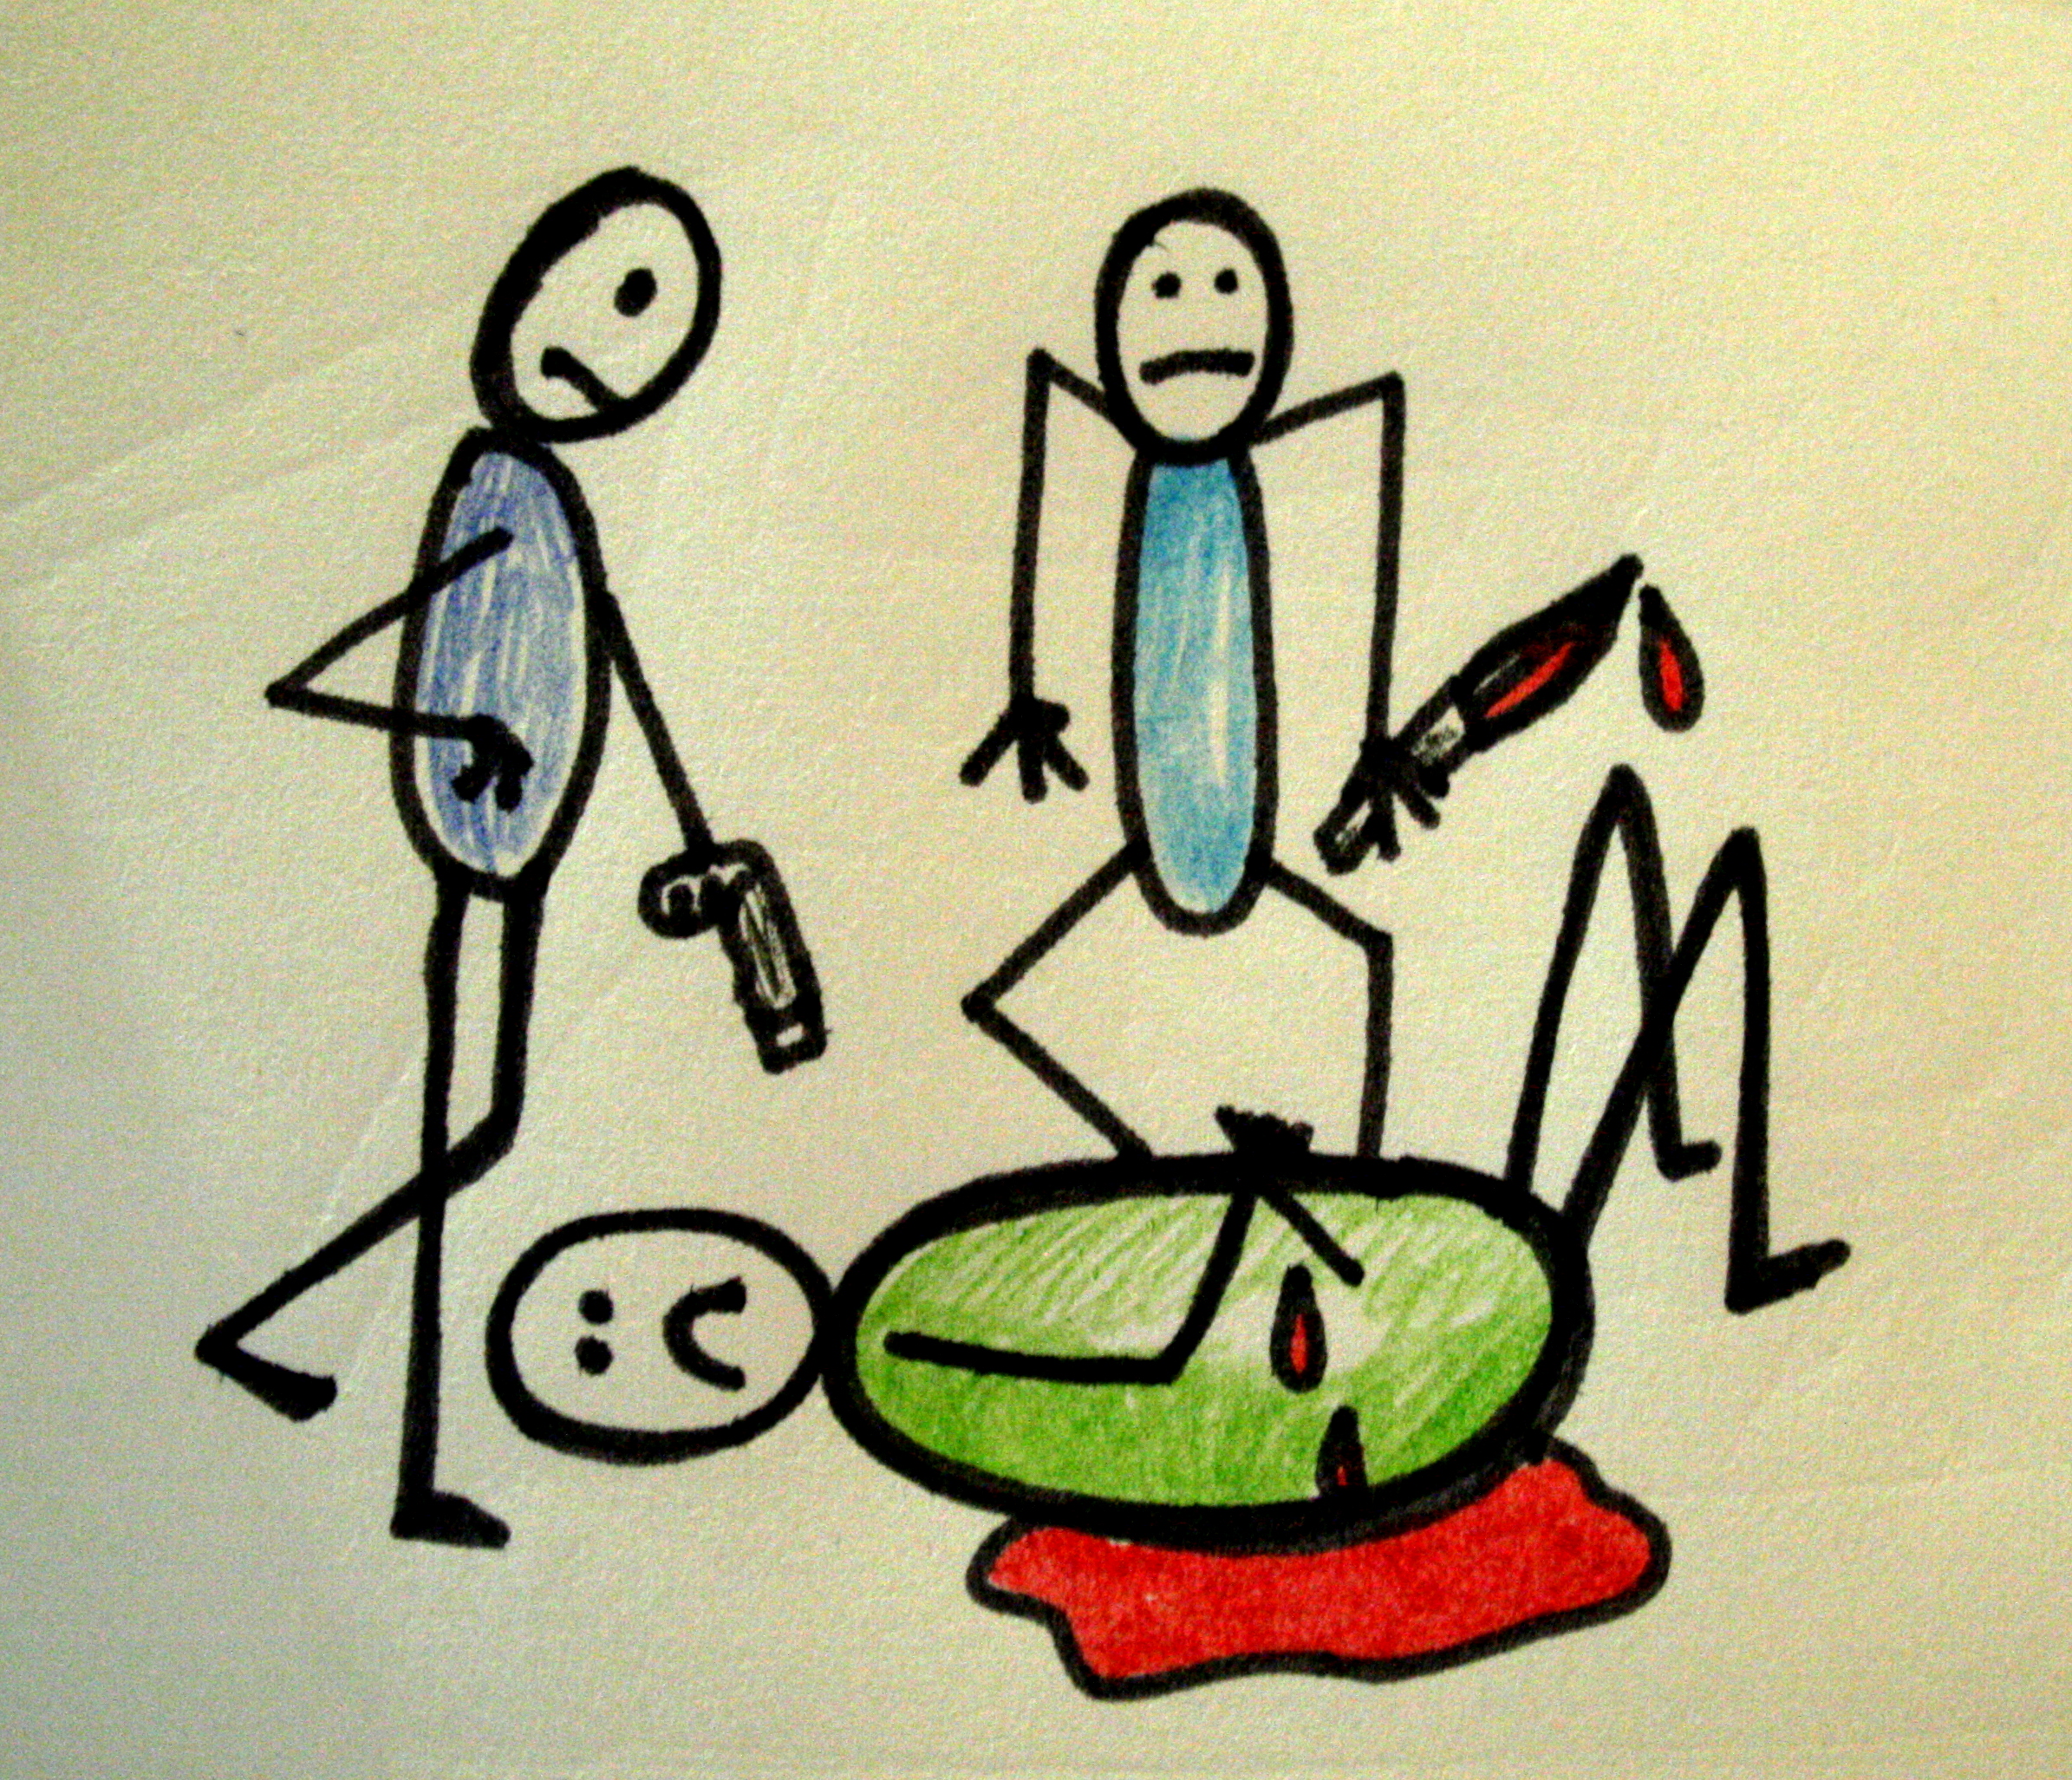 family violence clipart - photo #45